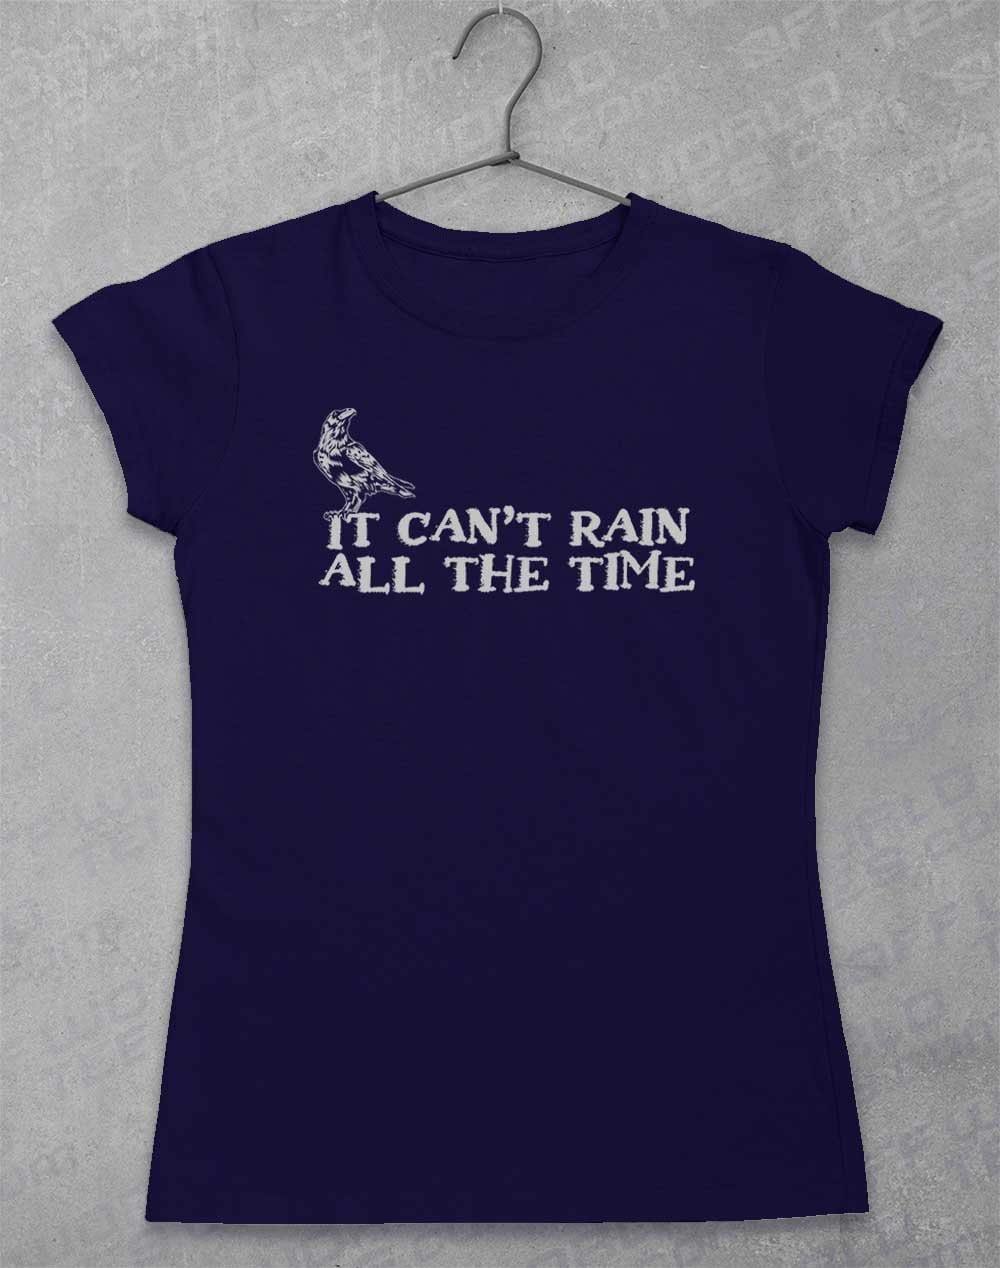 It Can't Rain All the Time Womens T-Shirt 8-10 / Navy  - Off World Tees